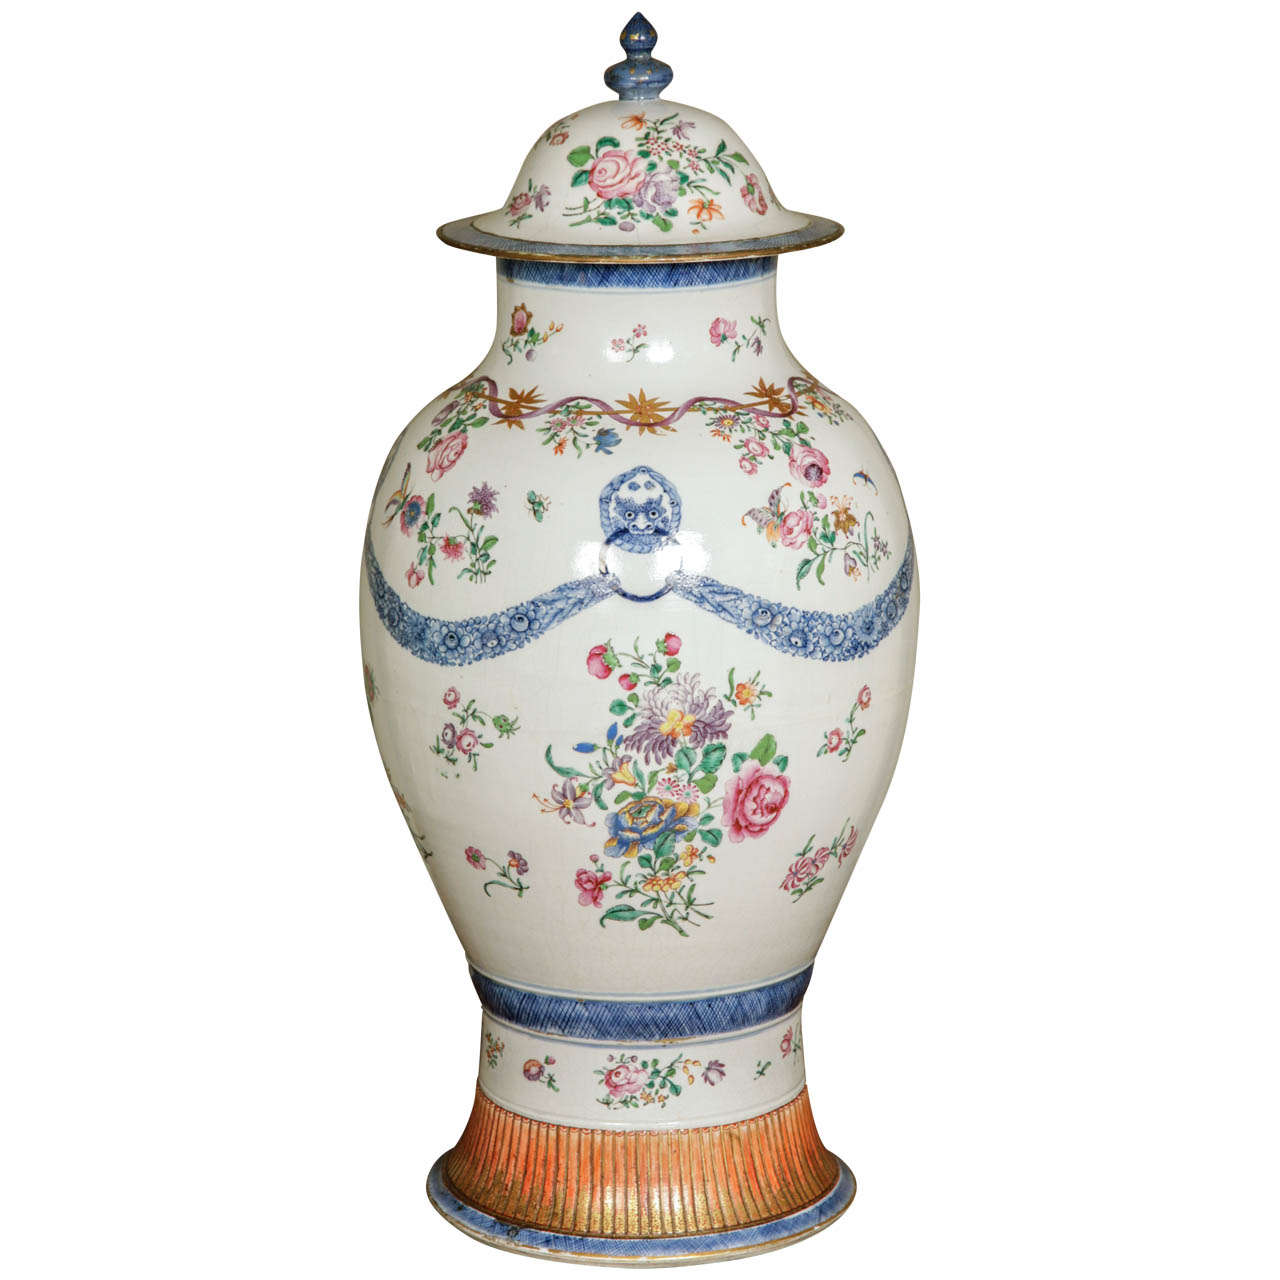 A Large 18th Century Chinese Famille Rose Baluster Vase circa 1775